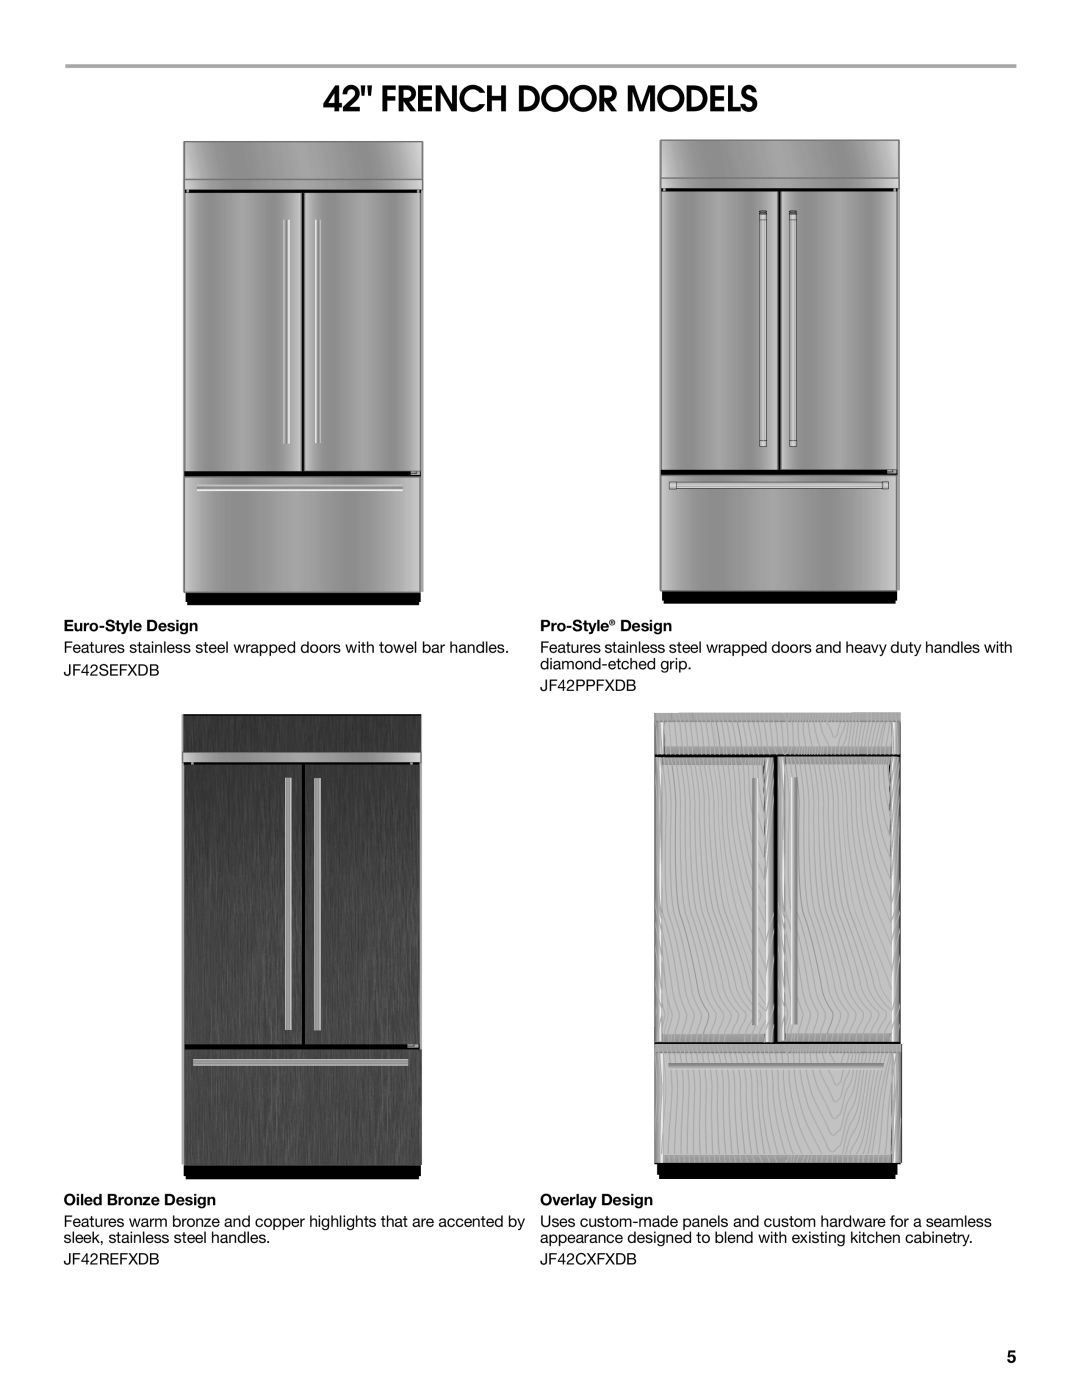 Jenn-Air W10183782A manual French Door Models, Euro-Style Design, Oiled Bronze Design, Pro-Style Design, Overlay Design 